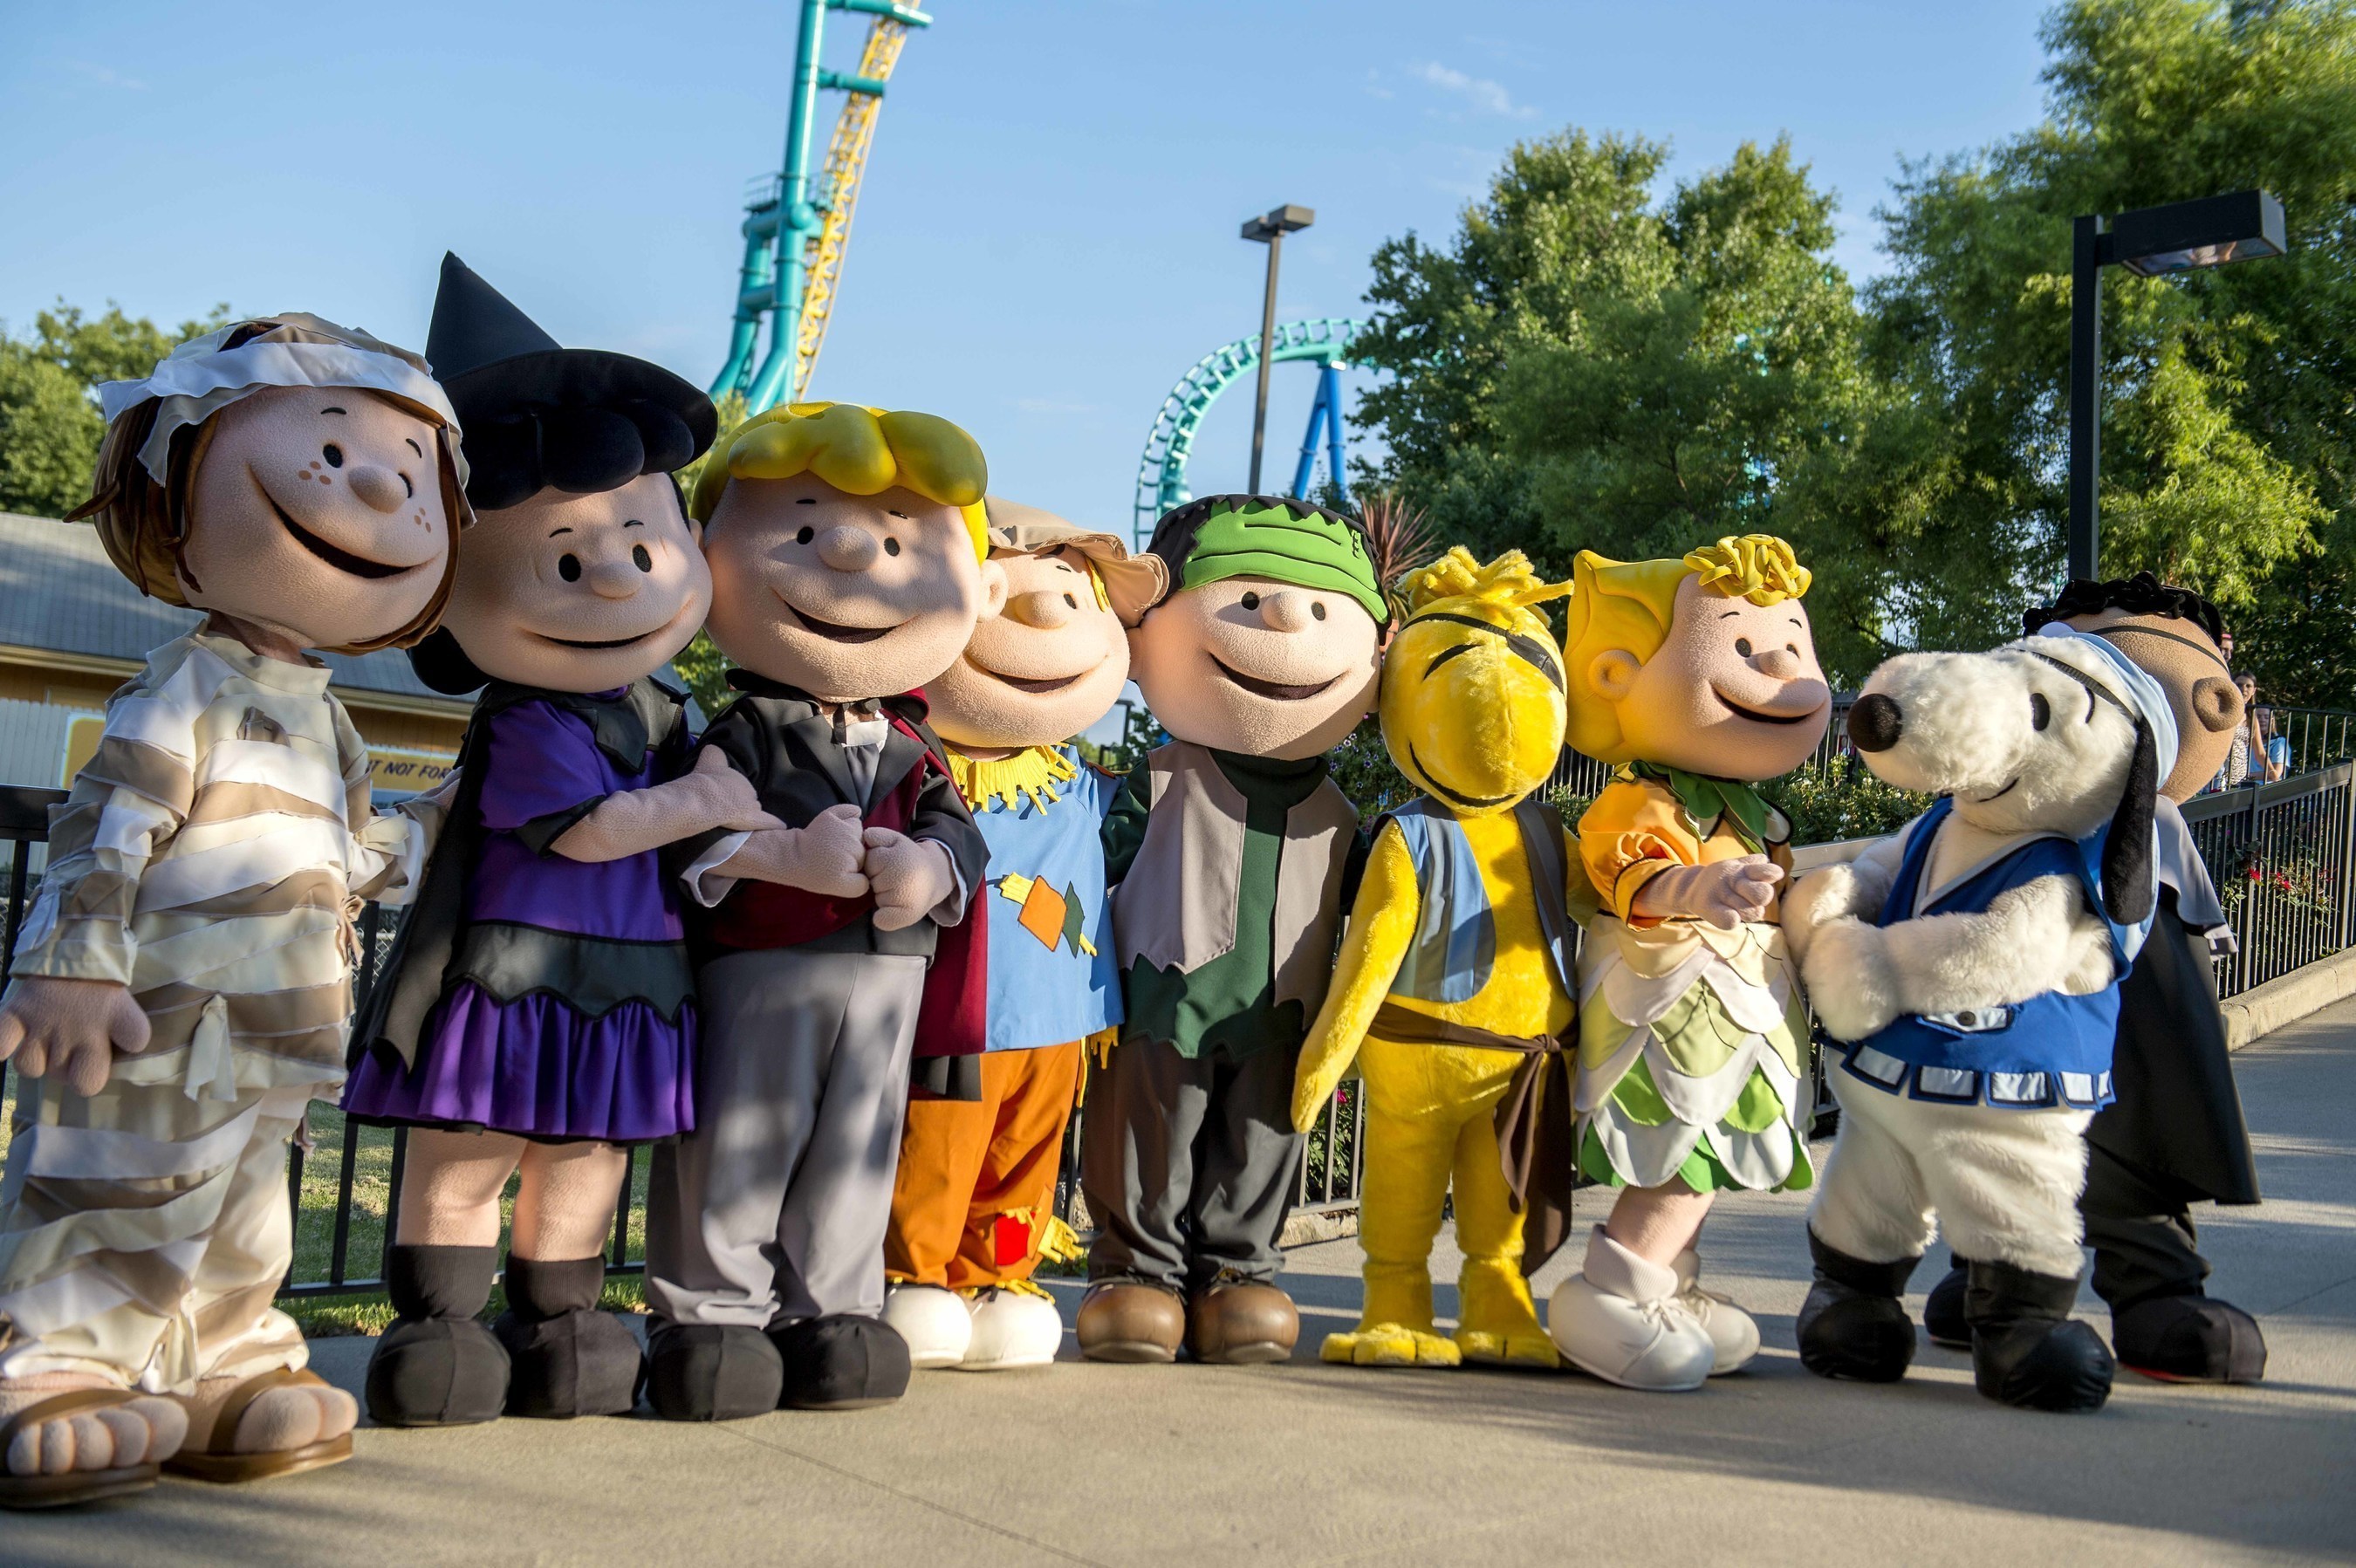 The Great Pumpkin Festival provides a festive, family-friendly experience that features PEANUTS characters, trick-or-treat stations, a foam pit, a petting zoo, numerous Halloween decorating activities, spectacular live entertainment and all the fun of Planet Snoopy!